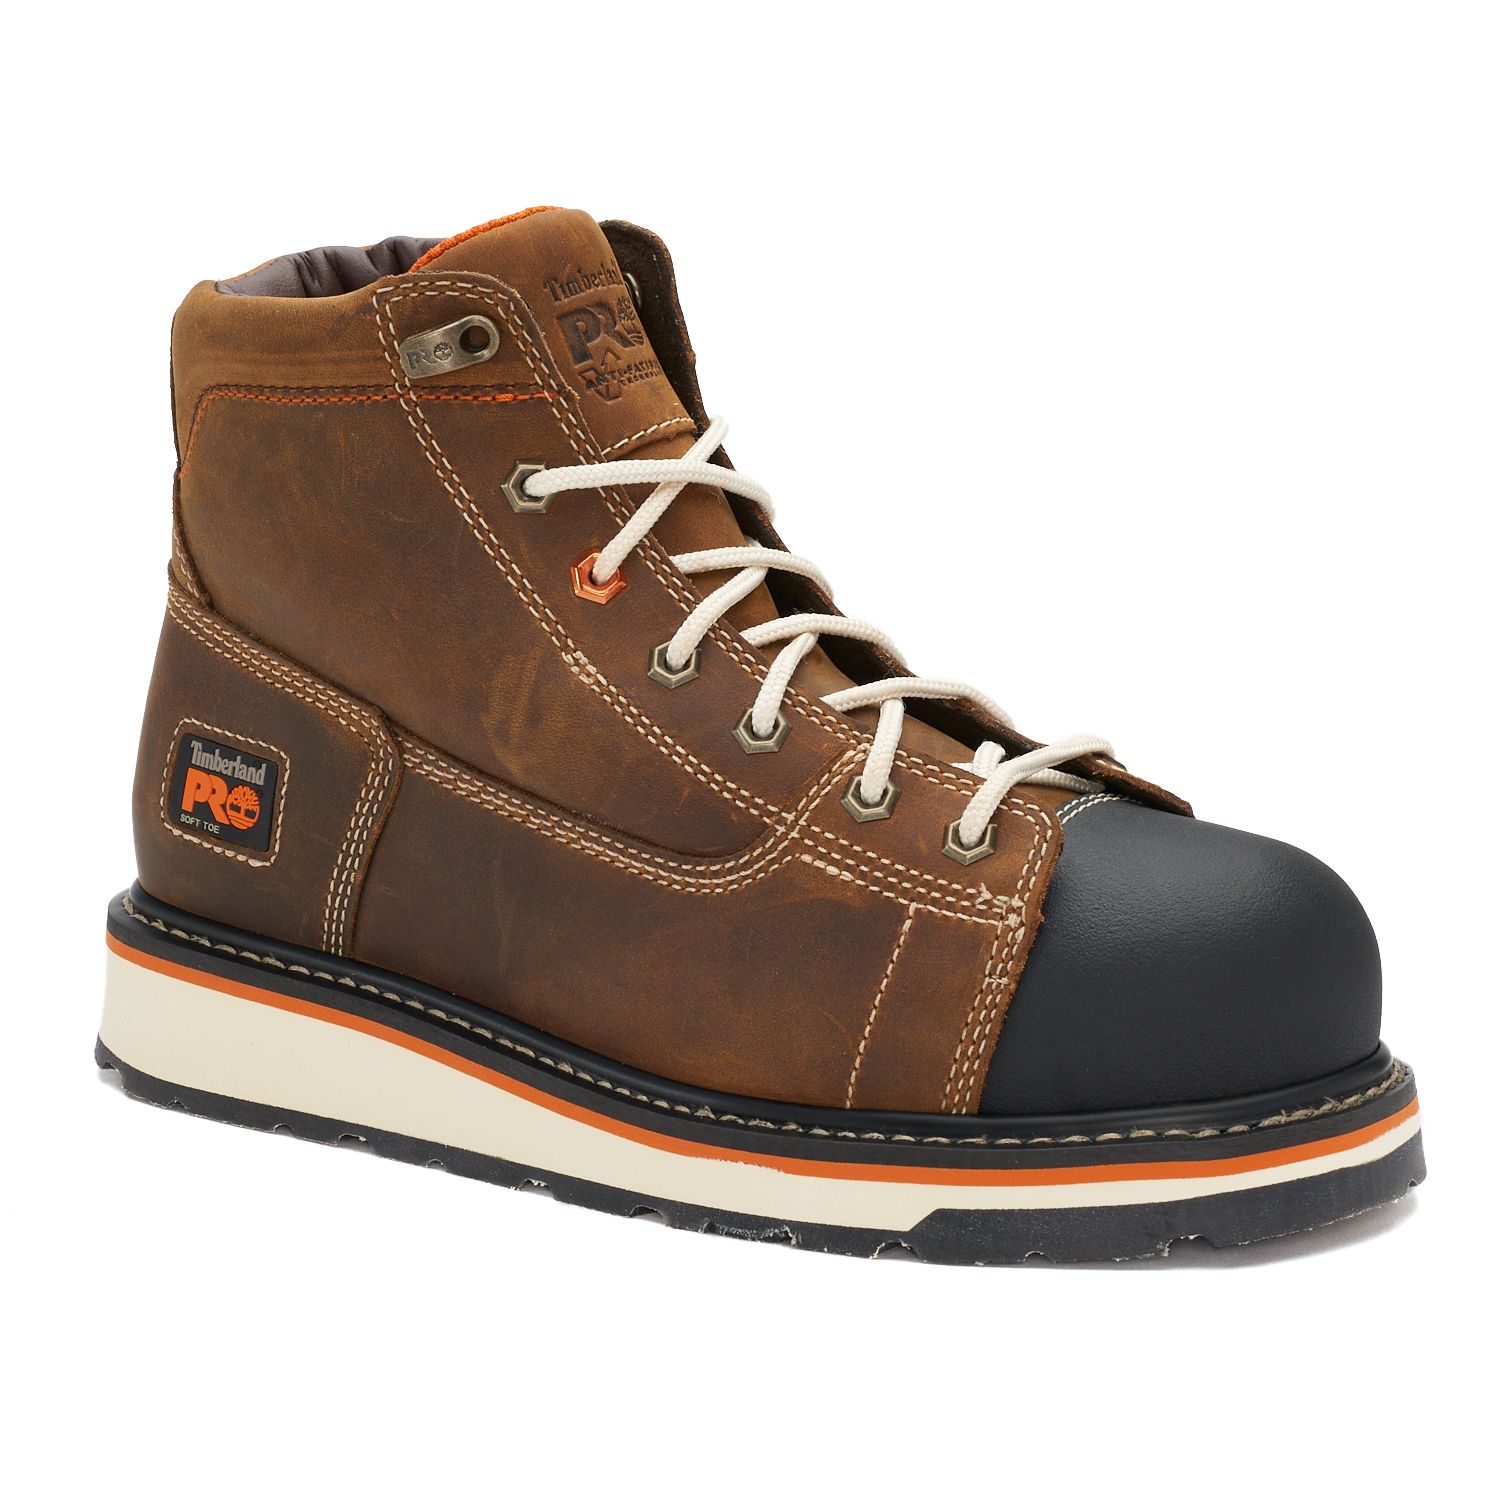 Timberland PRO Gridworks Men's Work Boots